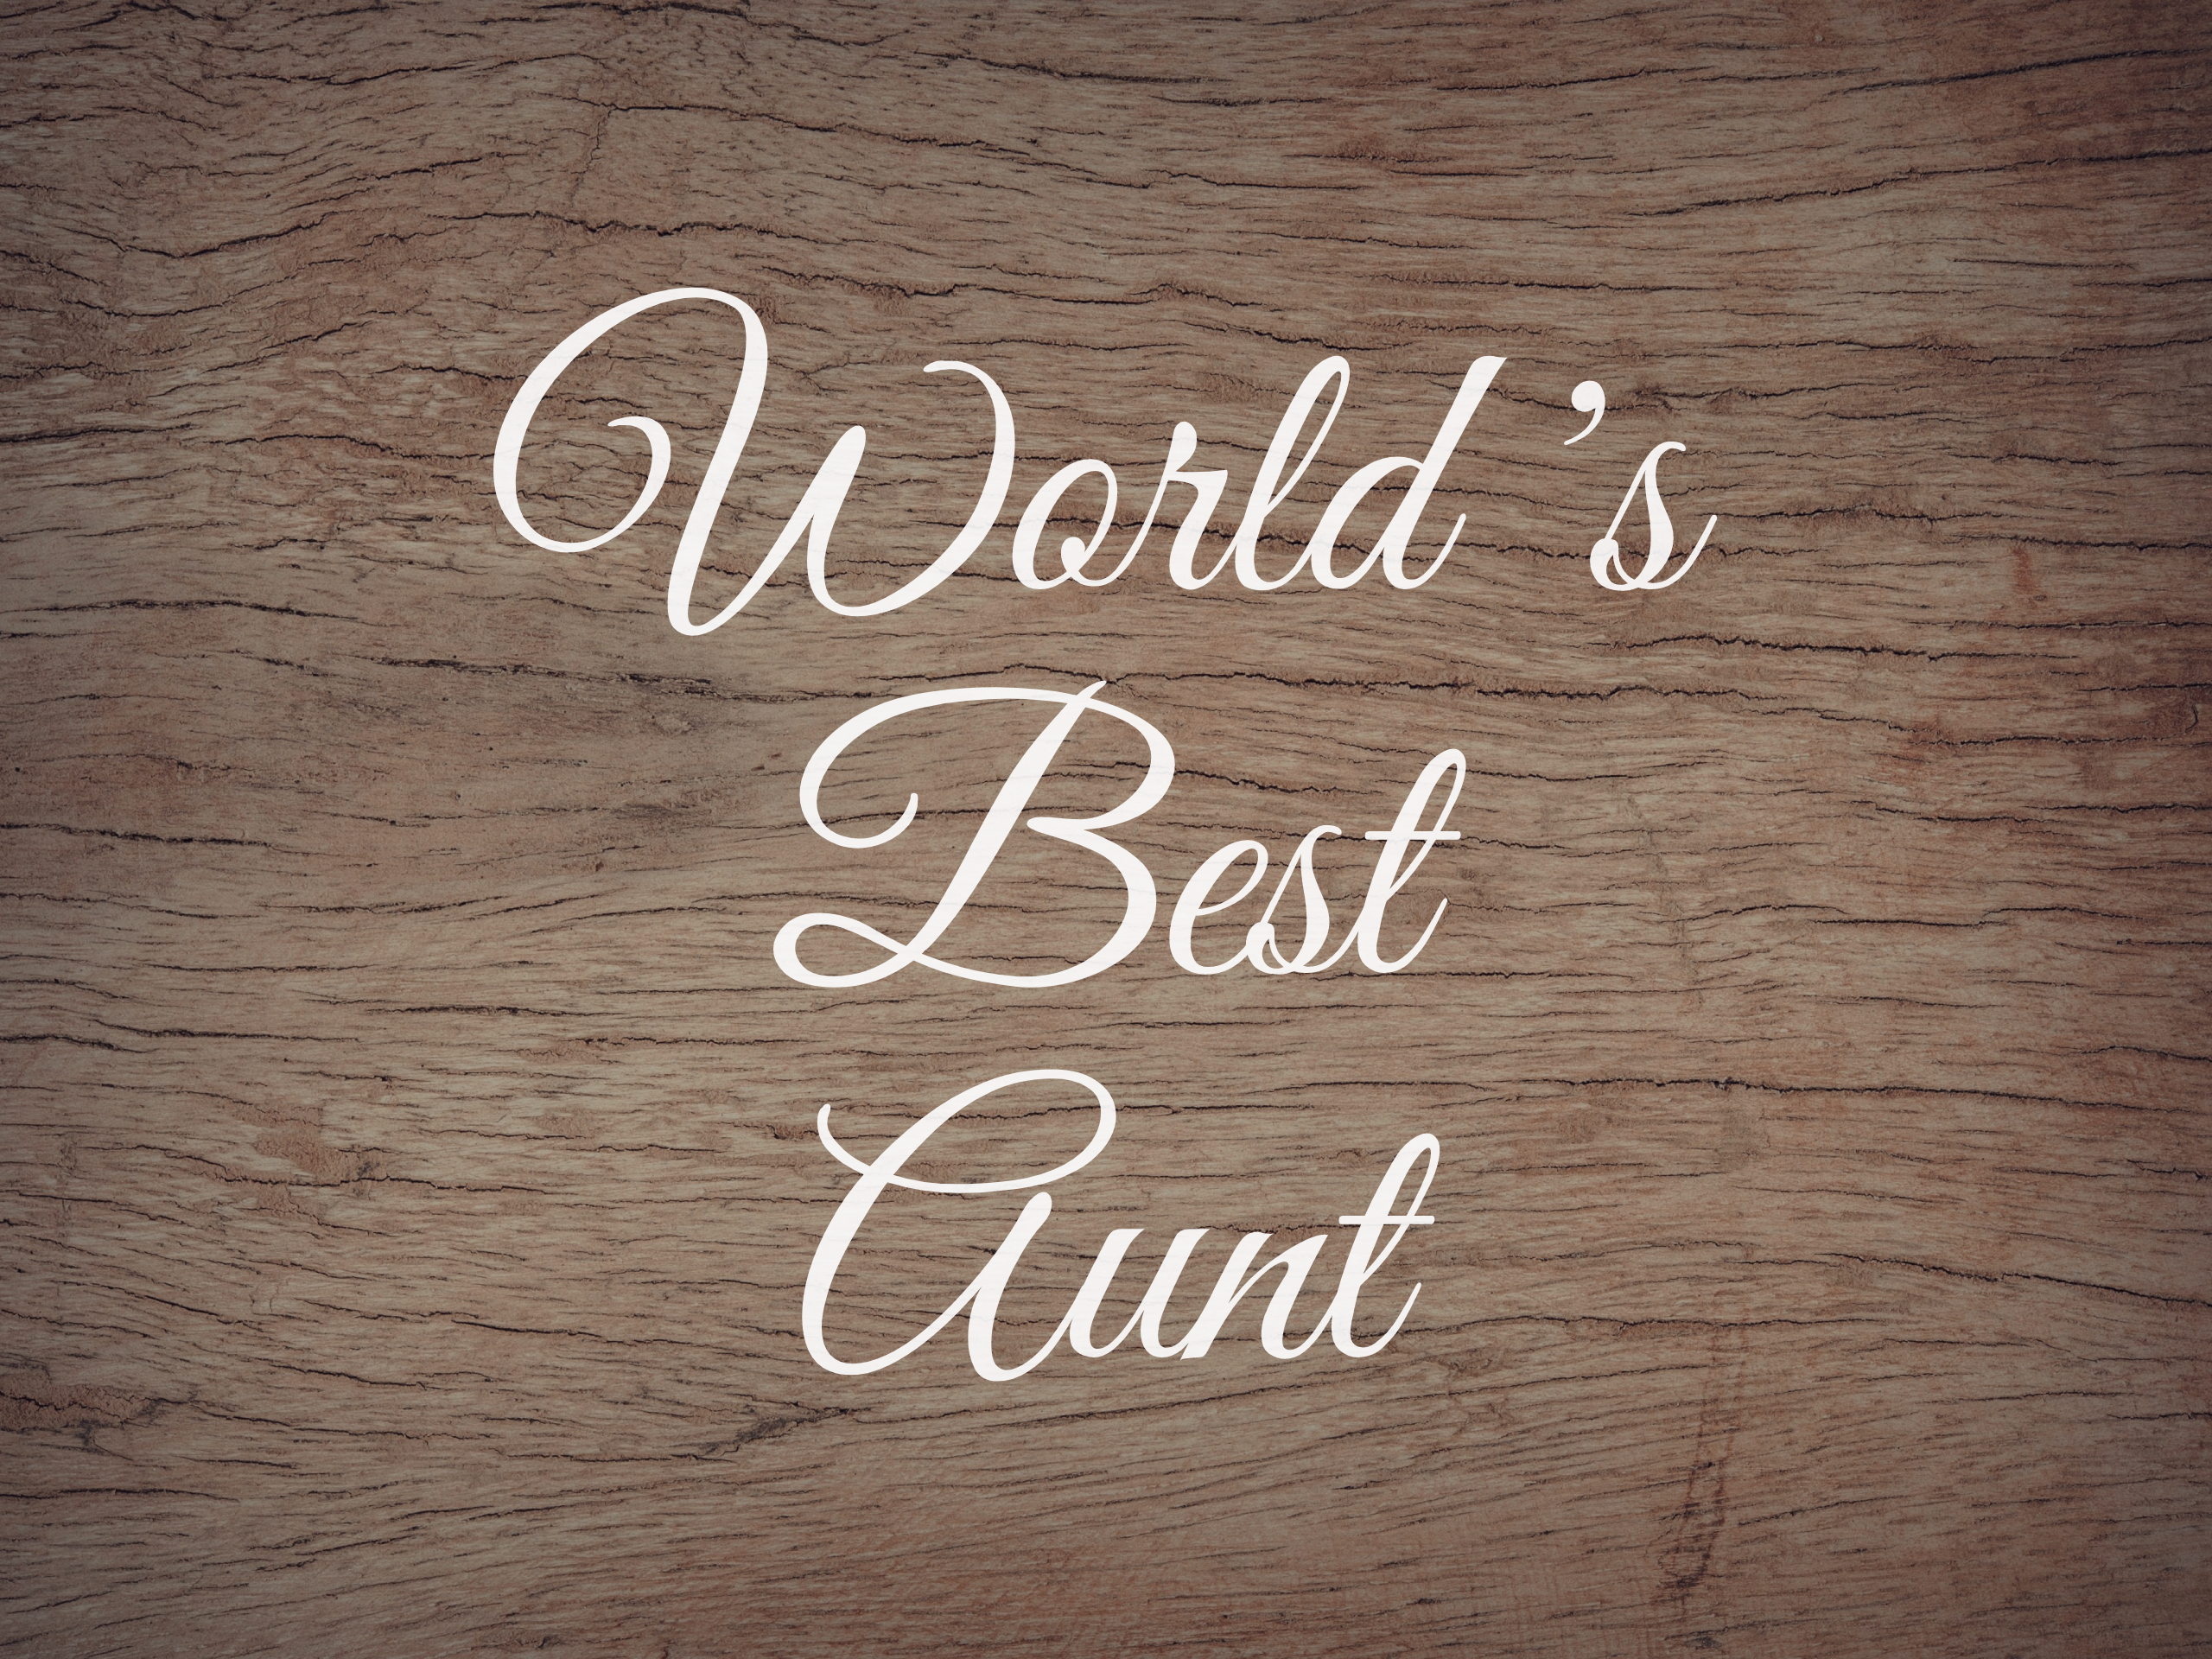 World's Best Aunt Decal - Holiday Aunt/Mother/Mom Vinyl Decals for Home, Gifts, Businesses and More!